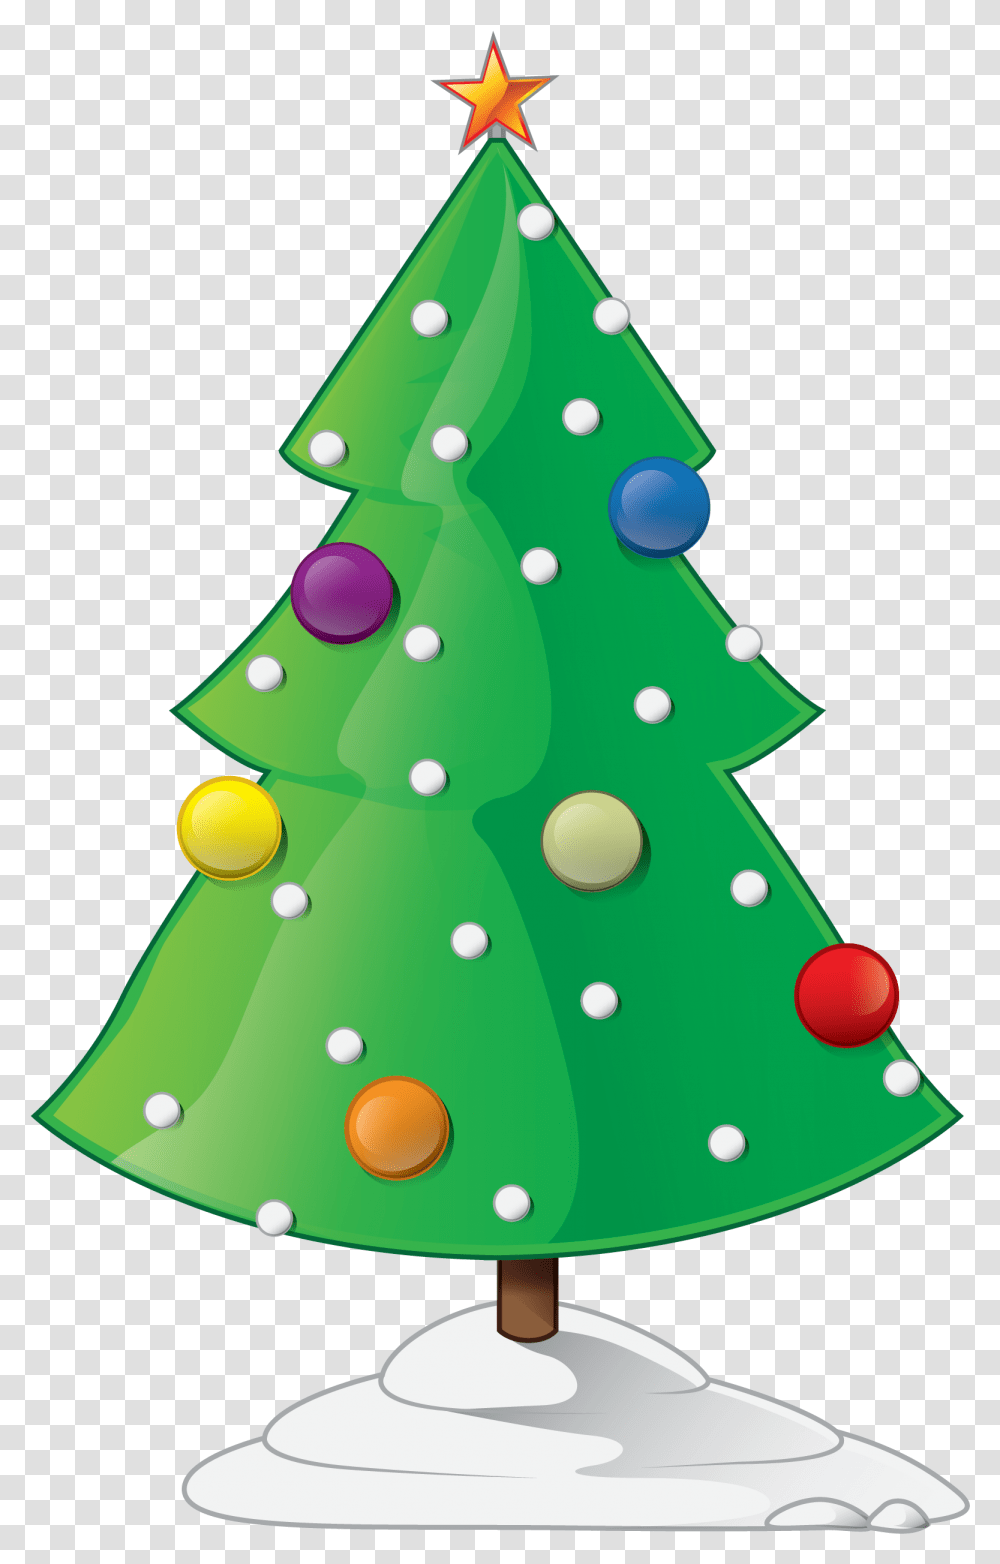 Showing Post Amp Media For Cartoon Christmas Ornament Flat Christmas Tree, Plant, Star Symbol Transparent Png